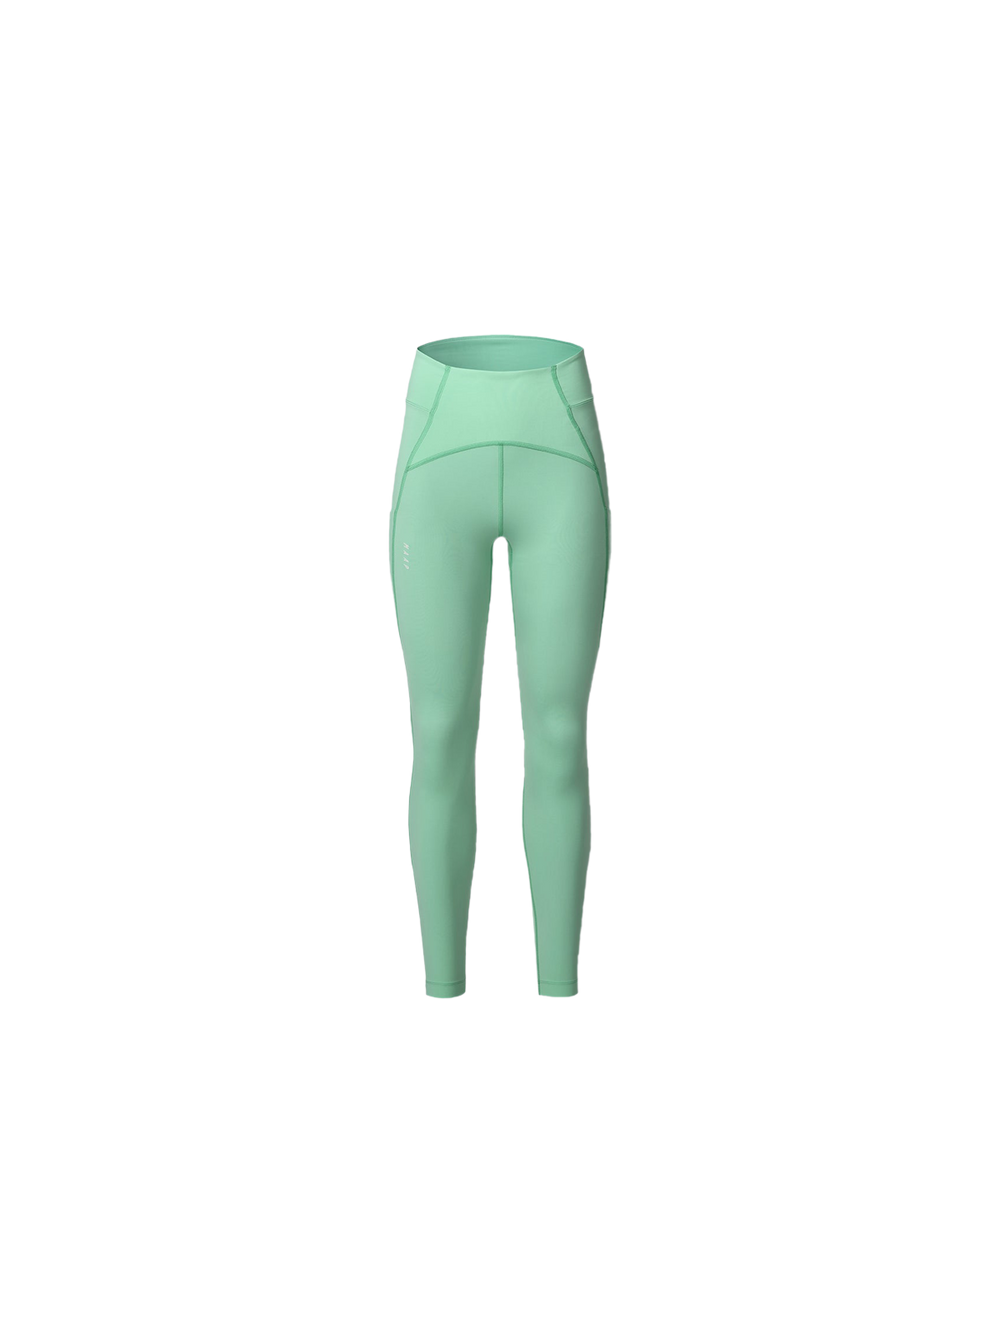 Product Image for Women's Everyday Legging